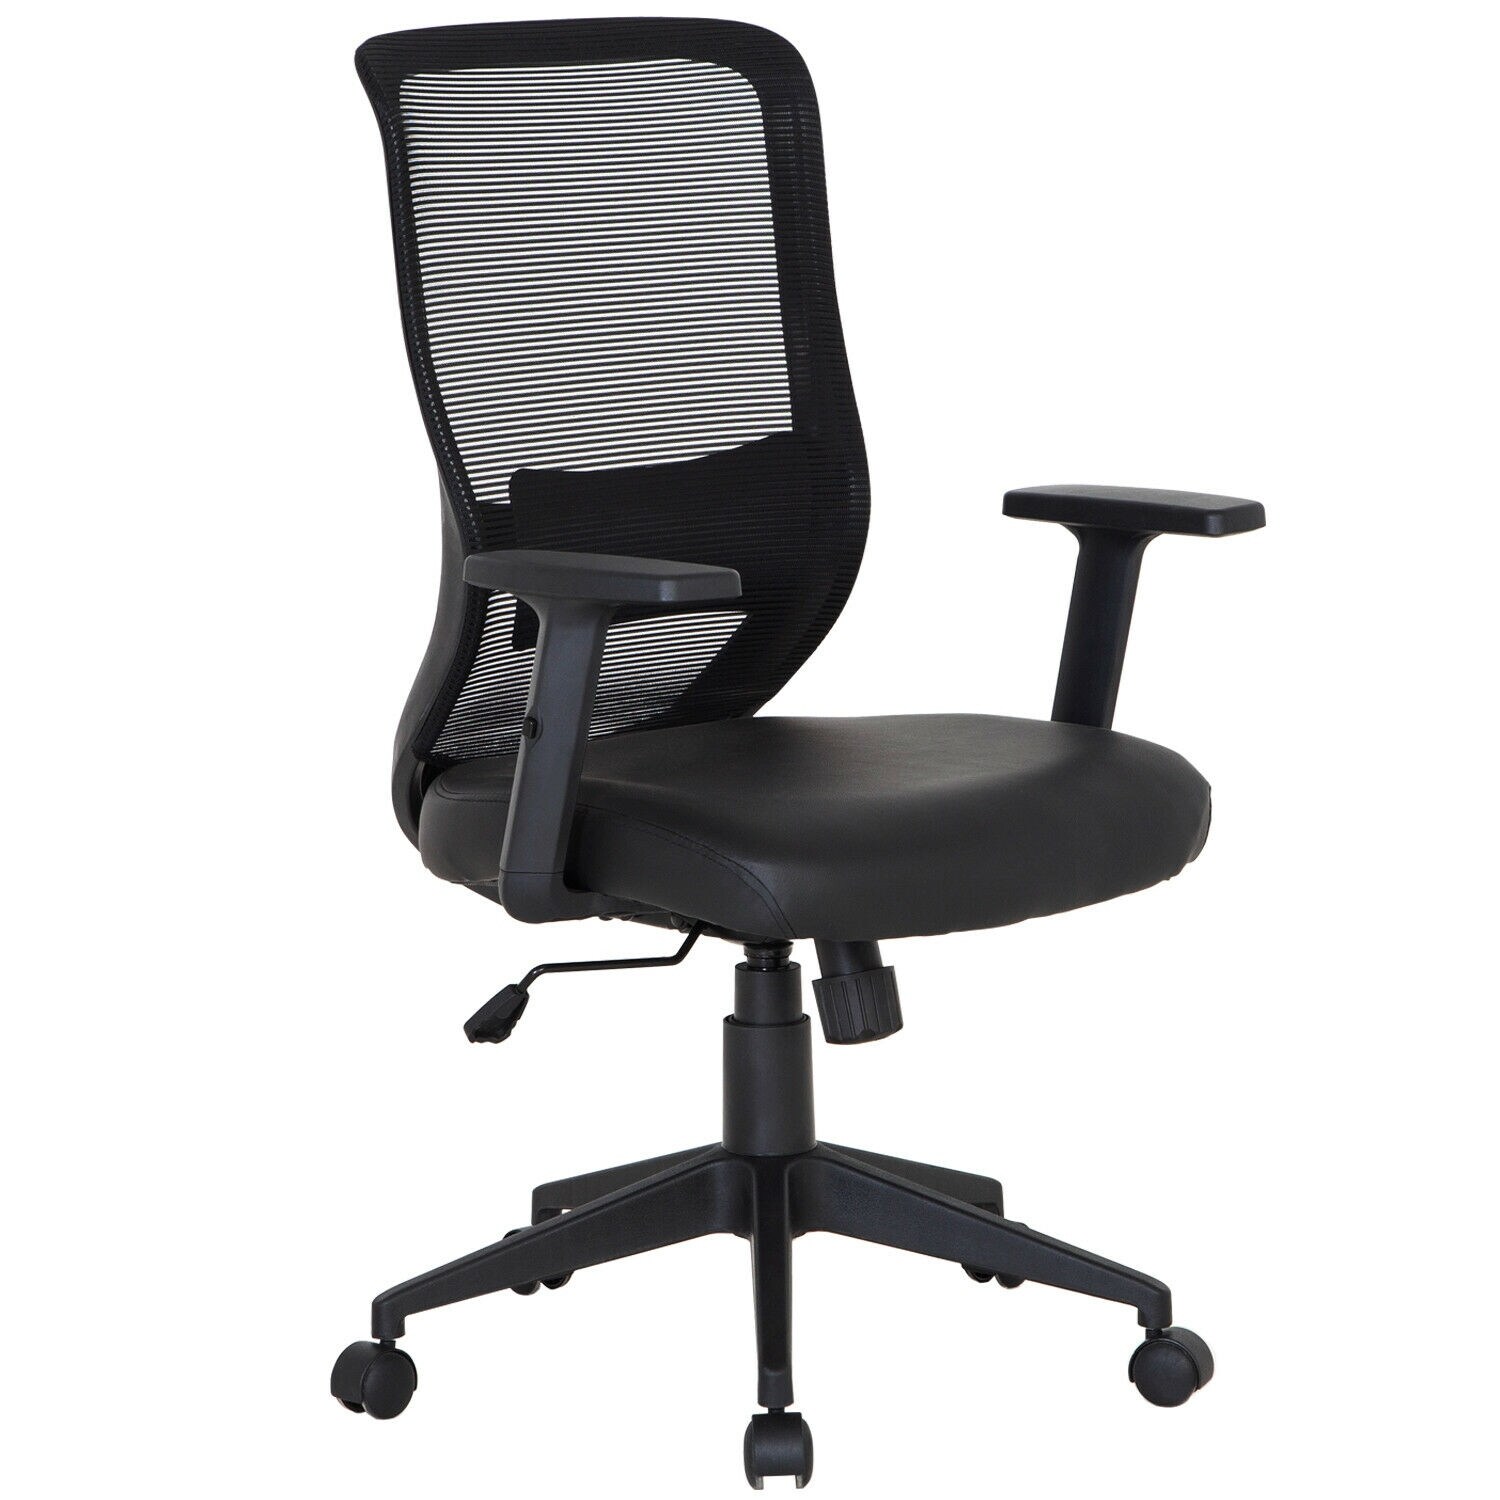 VECELO Premium Home Office/Conference Room Chairs for Task/Desk Work